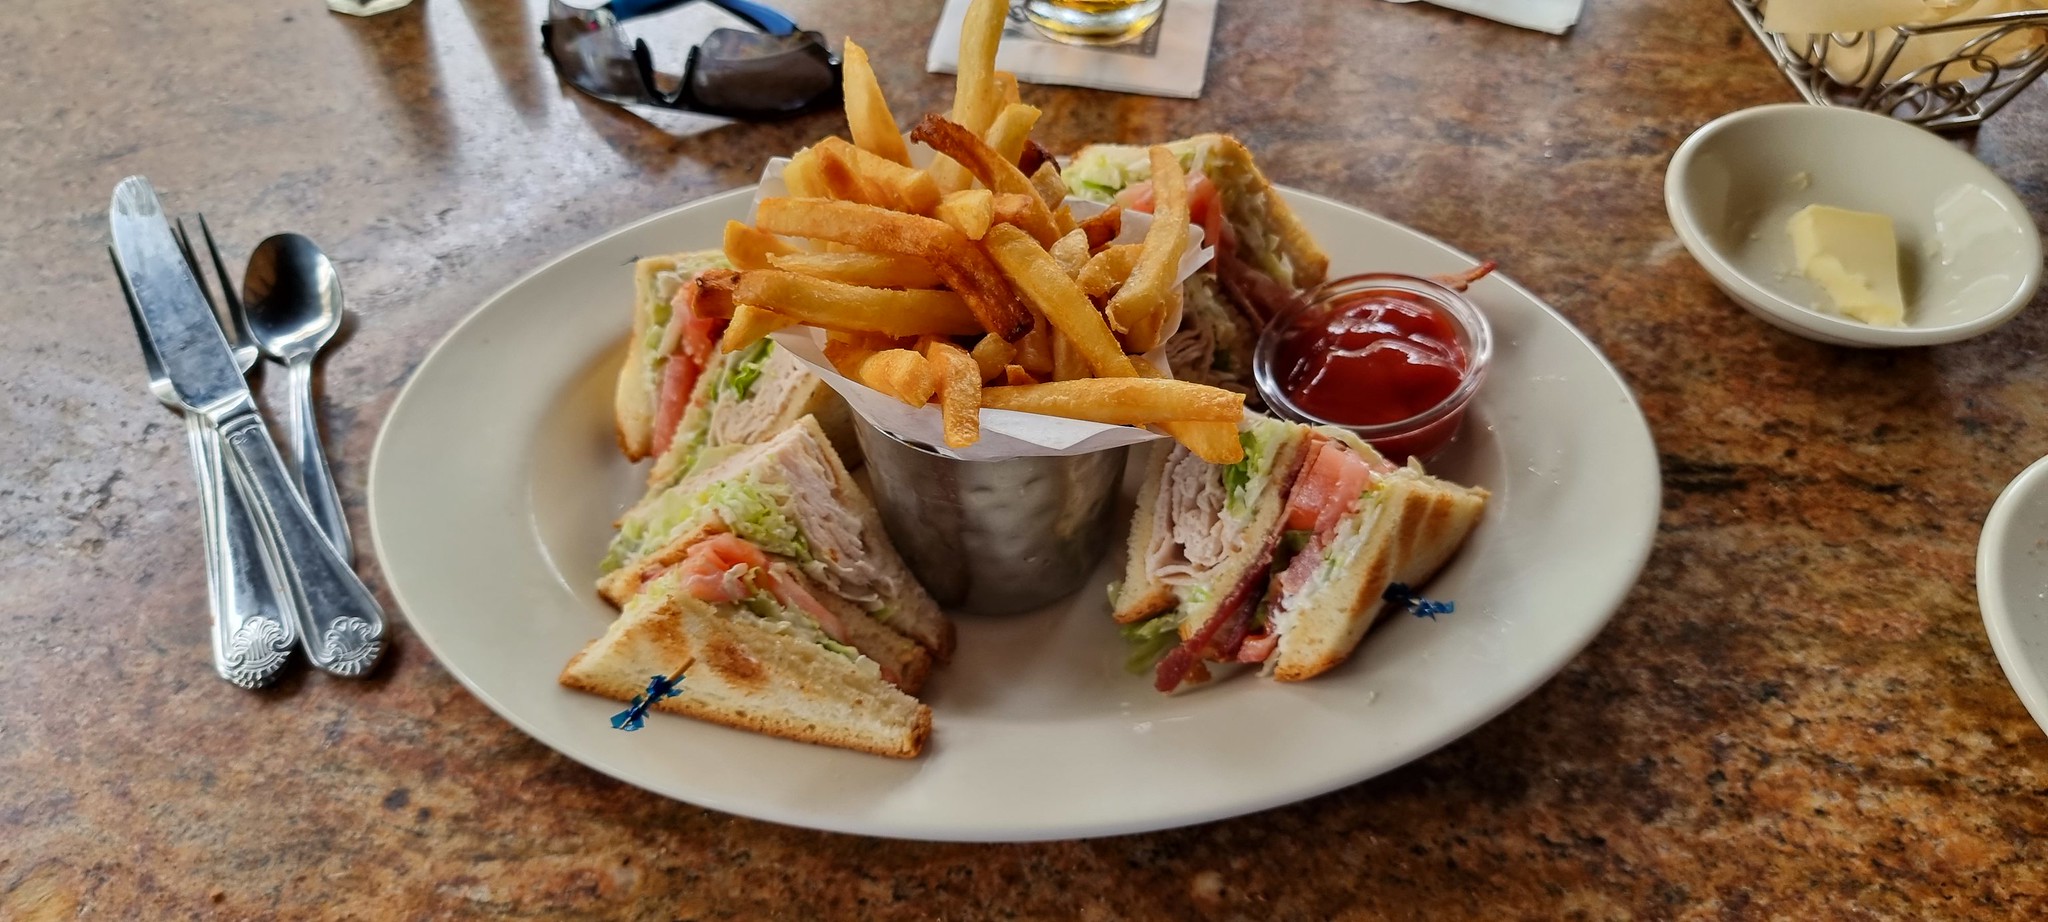 My club sandwich and fries enjoyed at The Cheesecake Factory in Waikiki